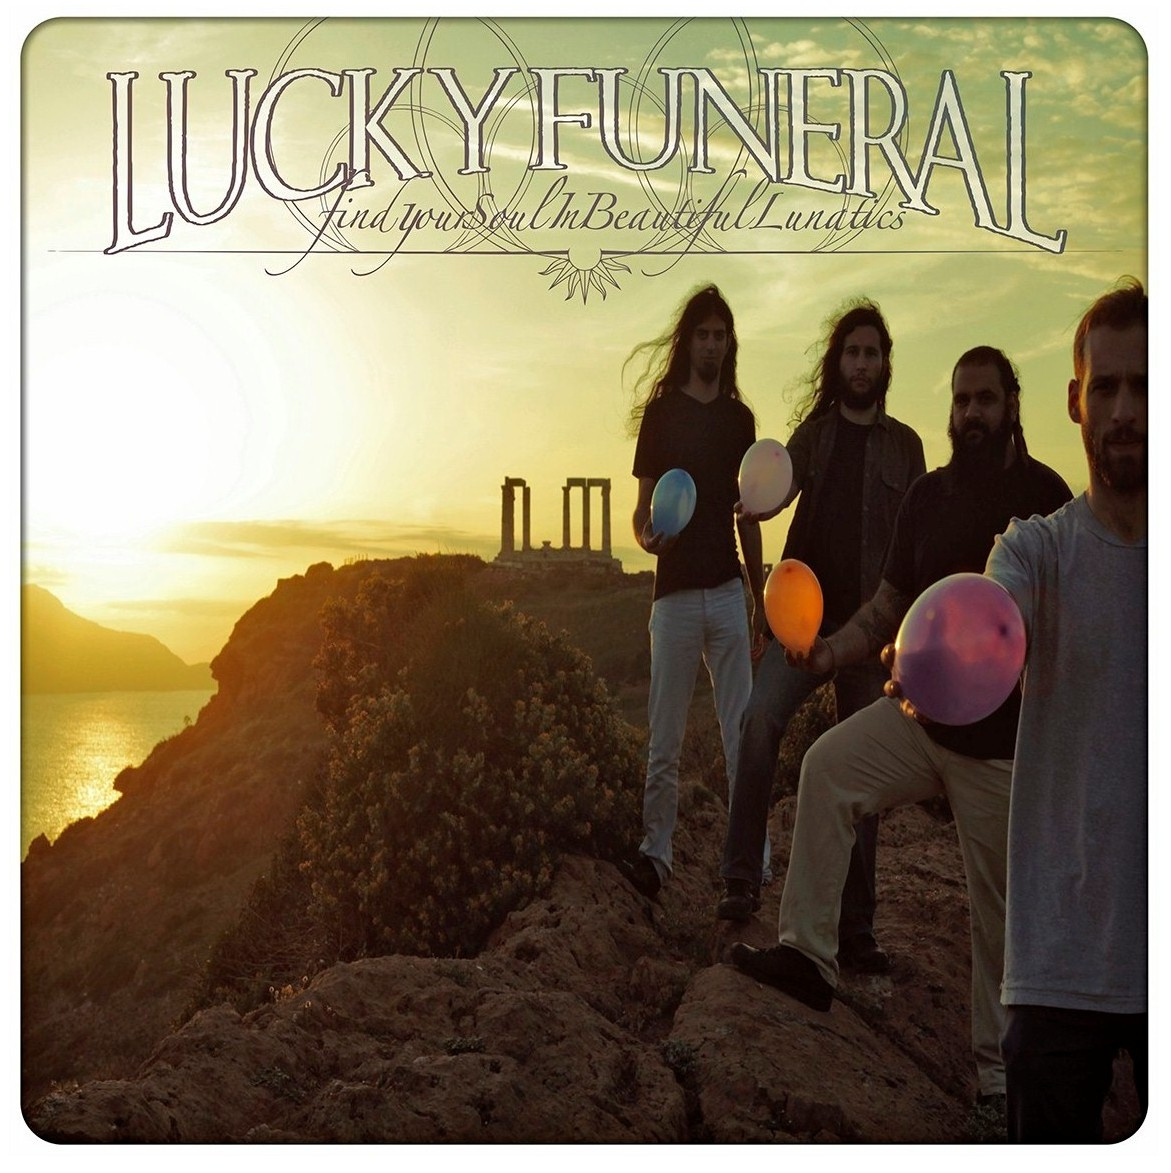 Lucky Funeral - Find Your Soul in Beautiful Lunatics 2013 - Cover.jpg